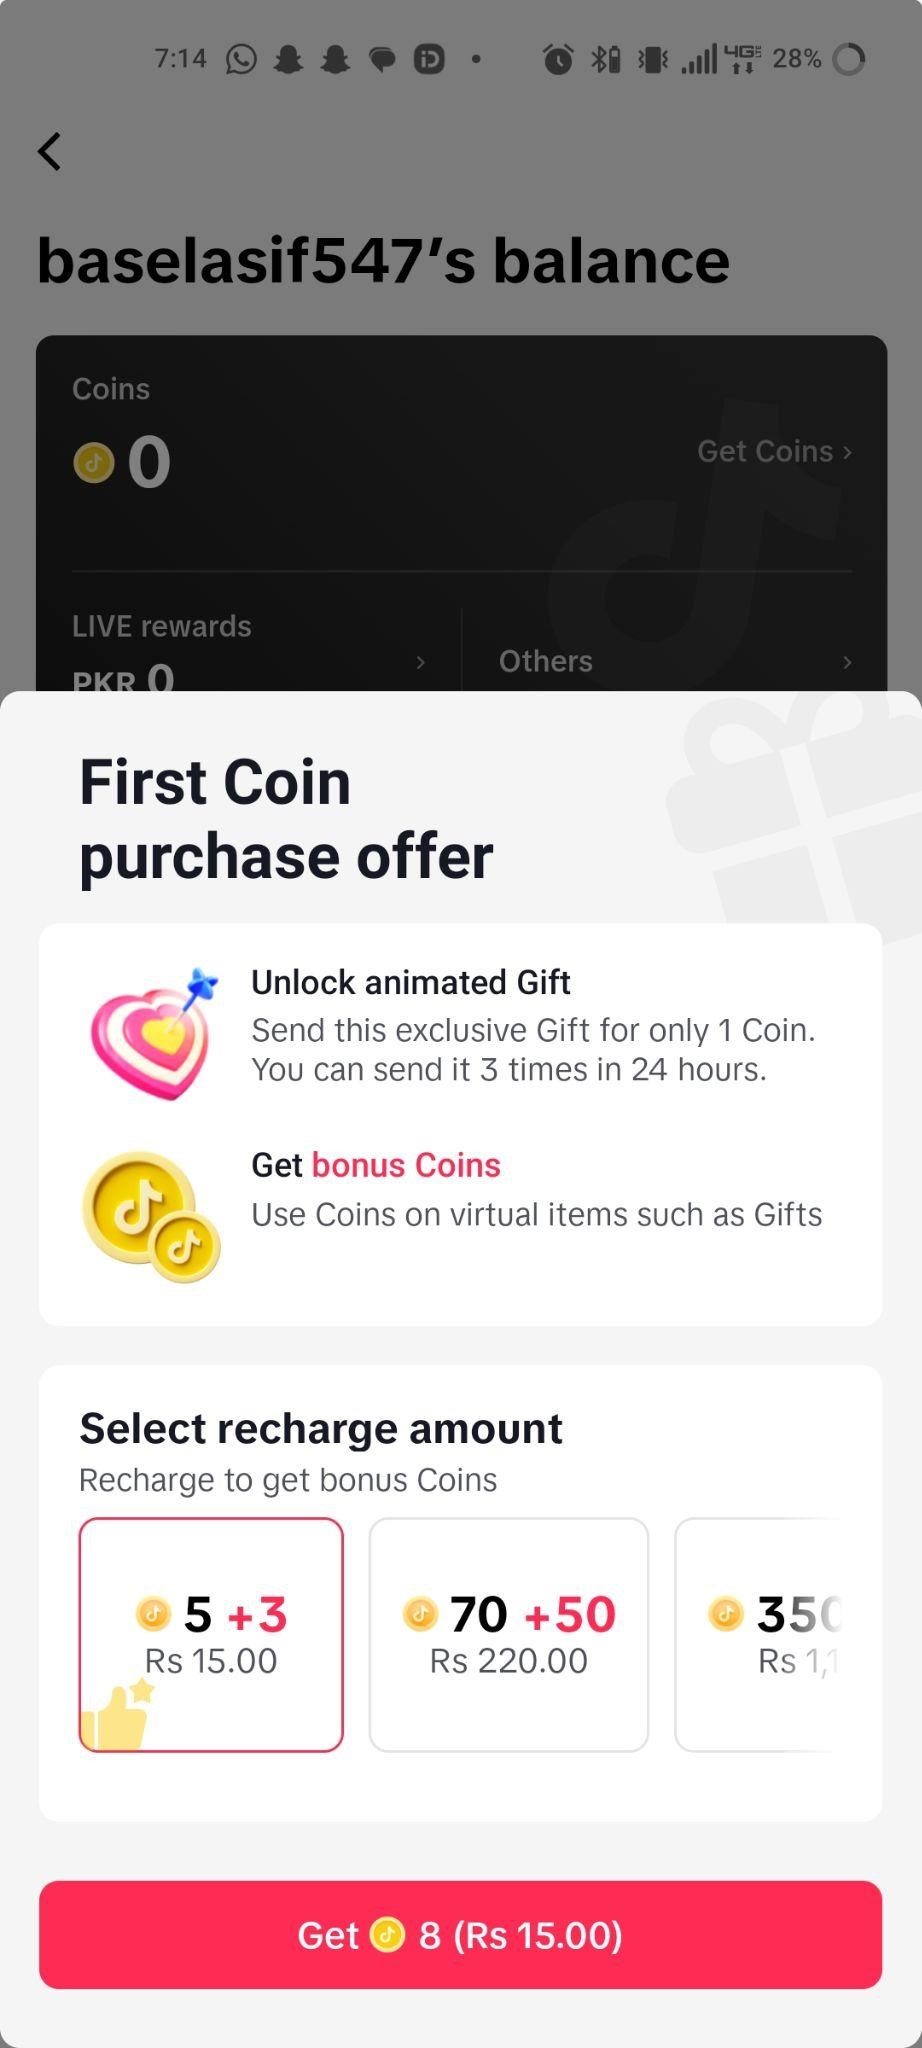 click Get Coins to purchase 